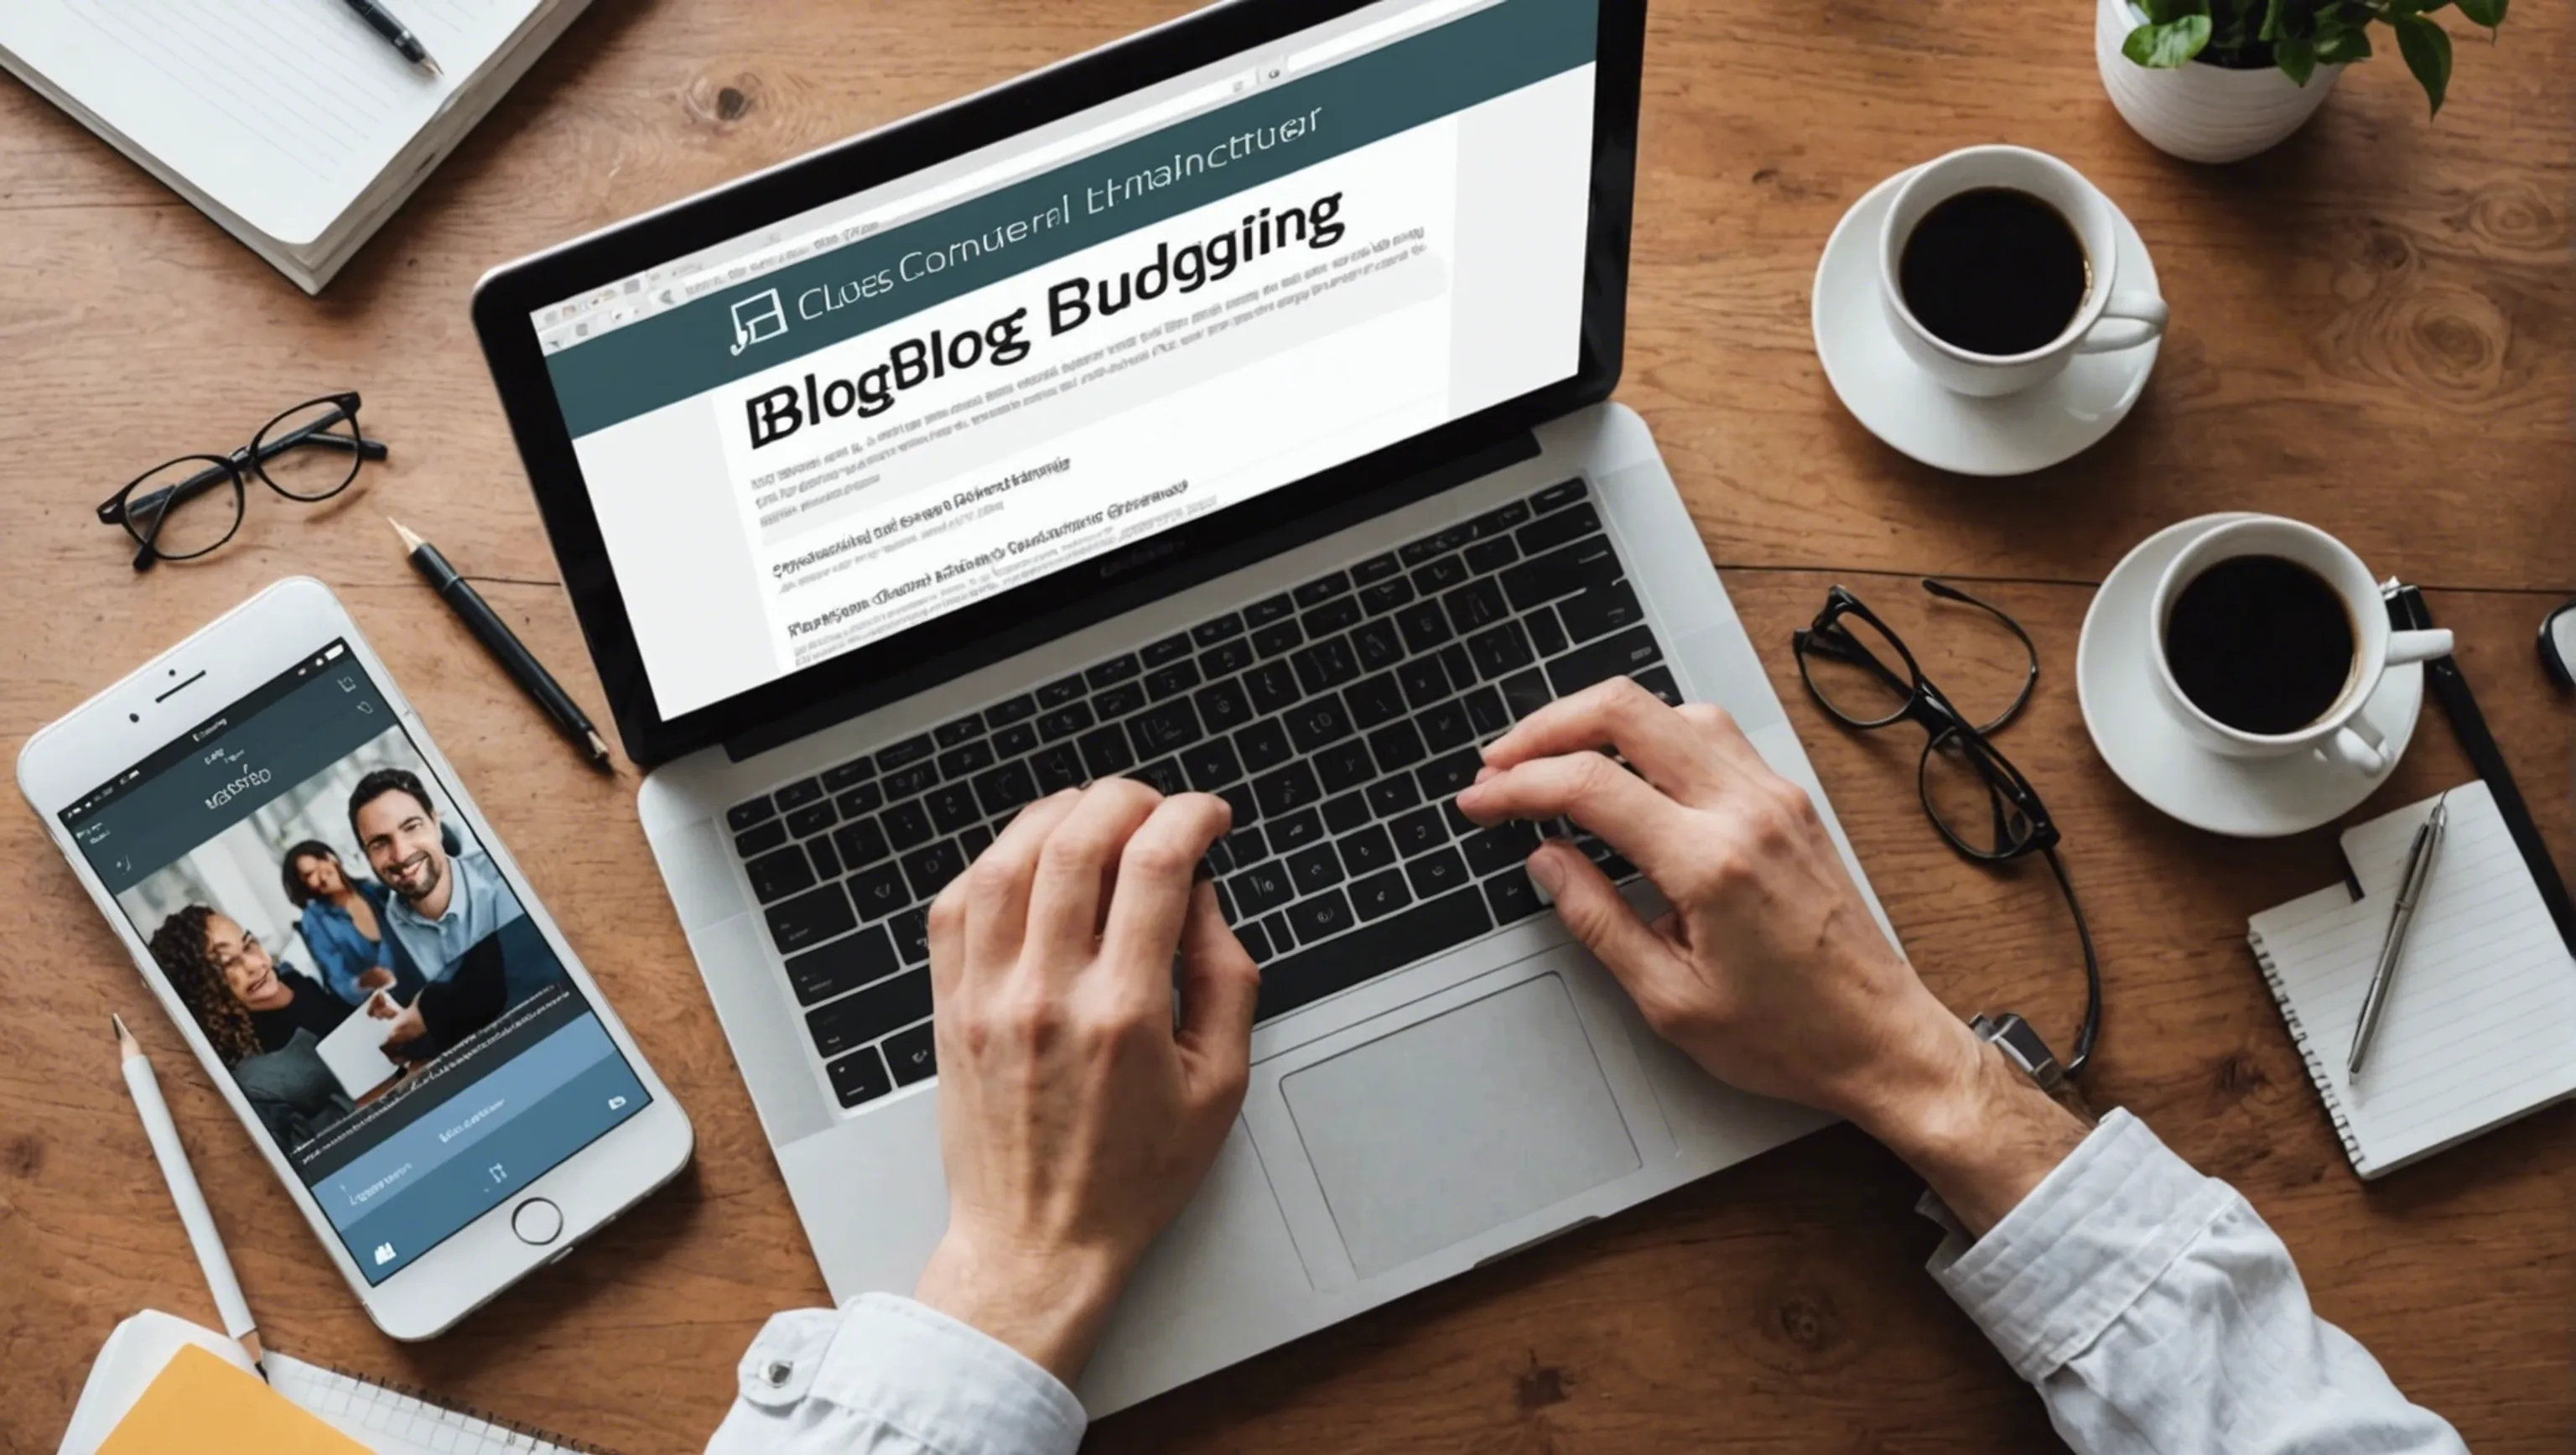 Reaching out to blog owners and editors for guest blogging